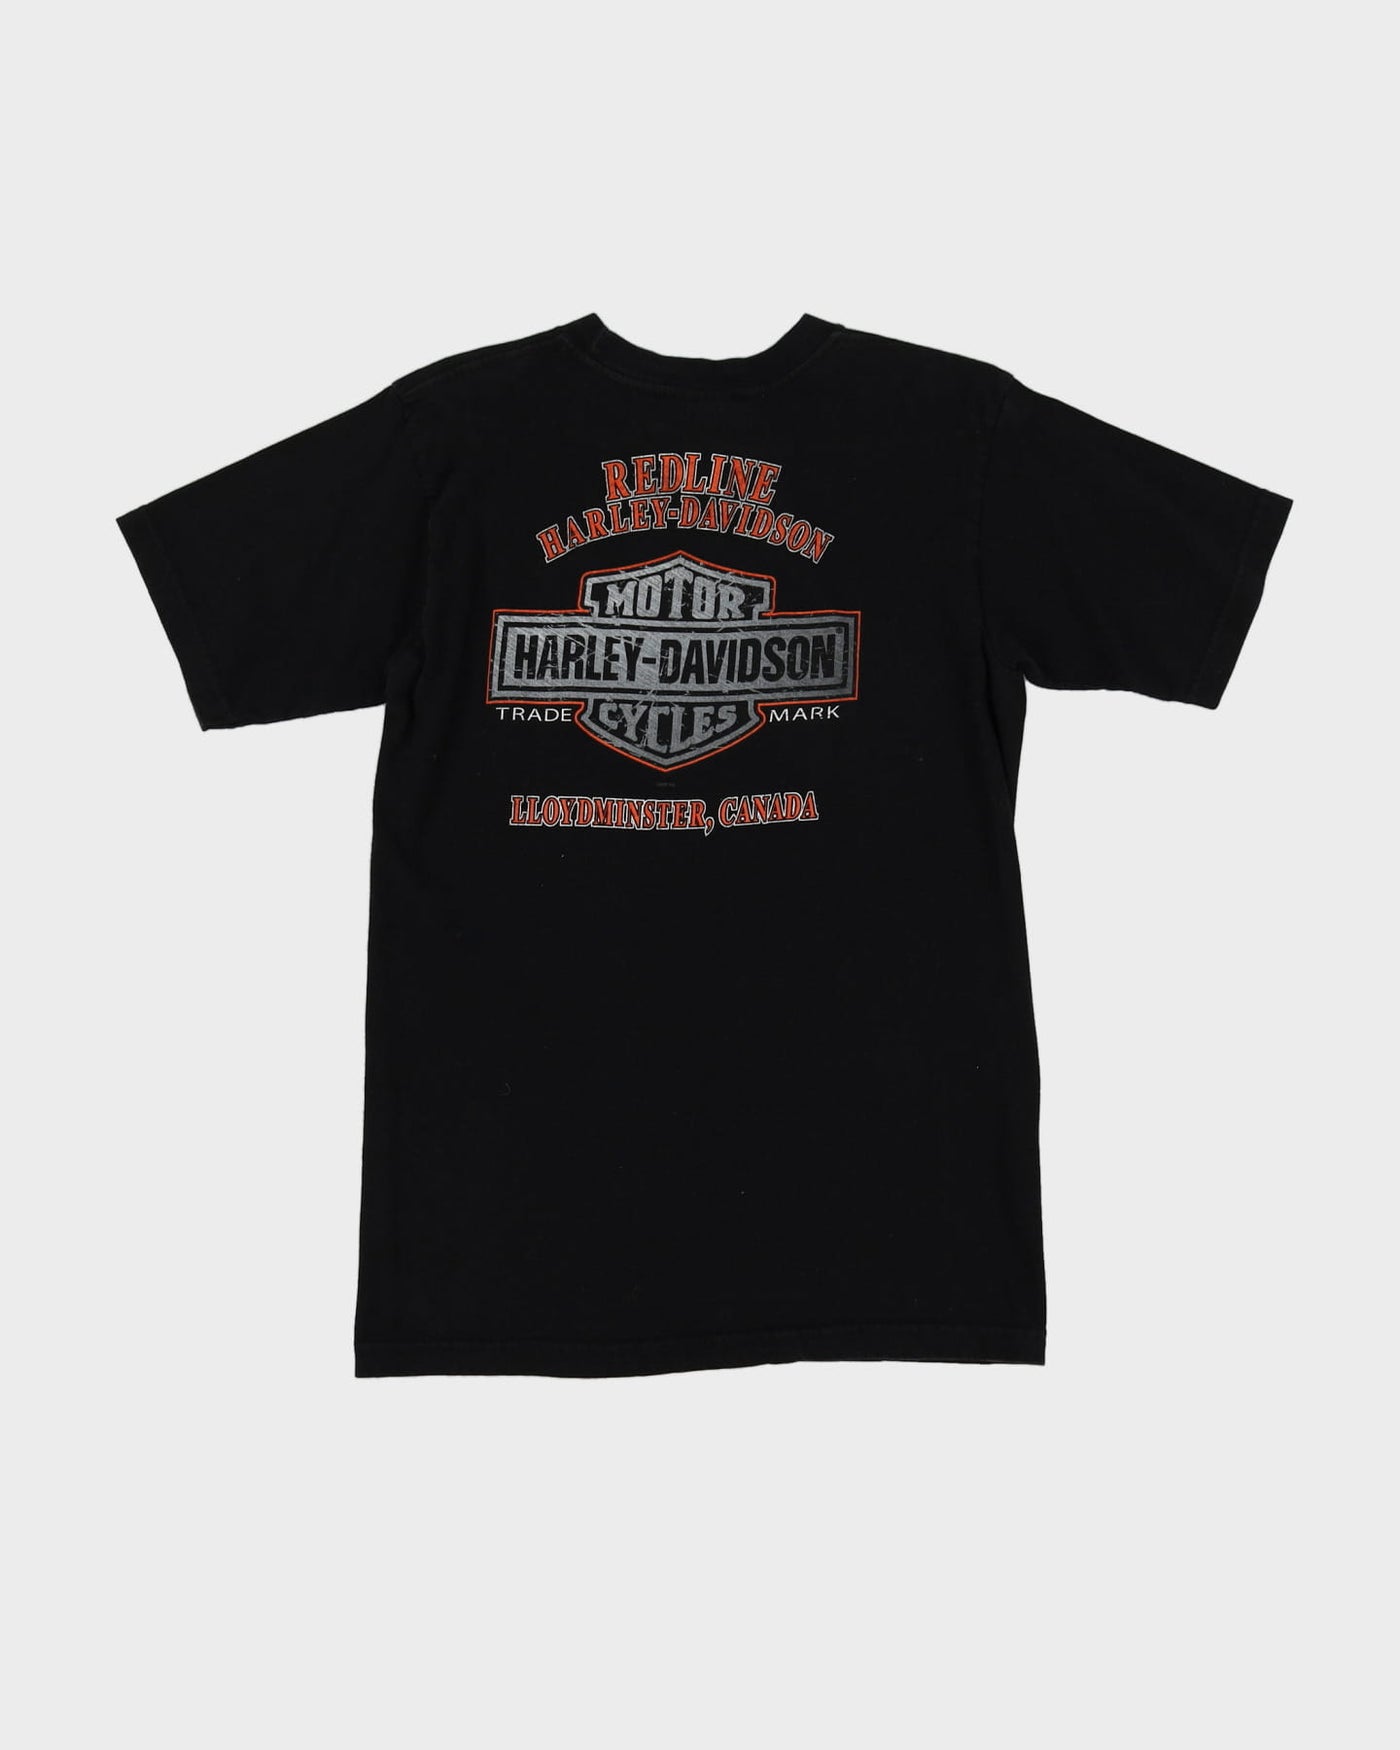 2008 Harley Davidson Black Ride With Style Graphic T-Shirt - S